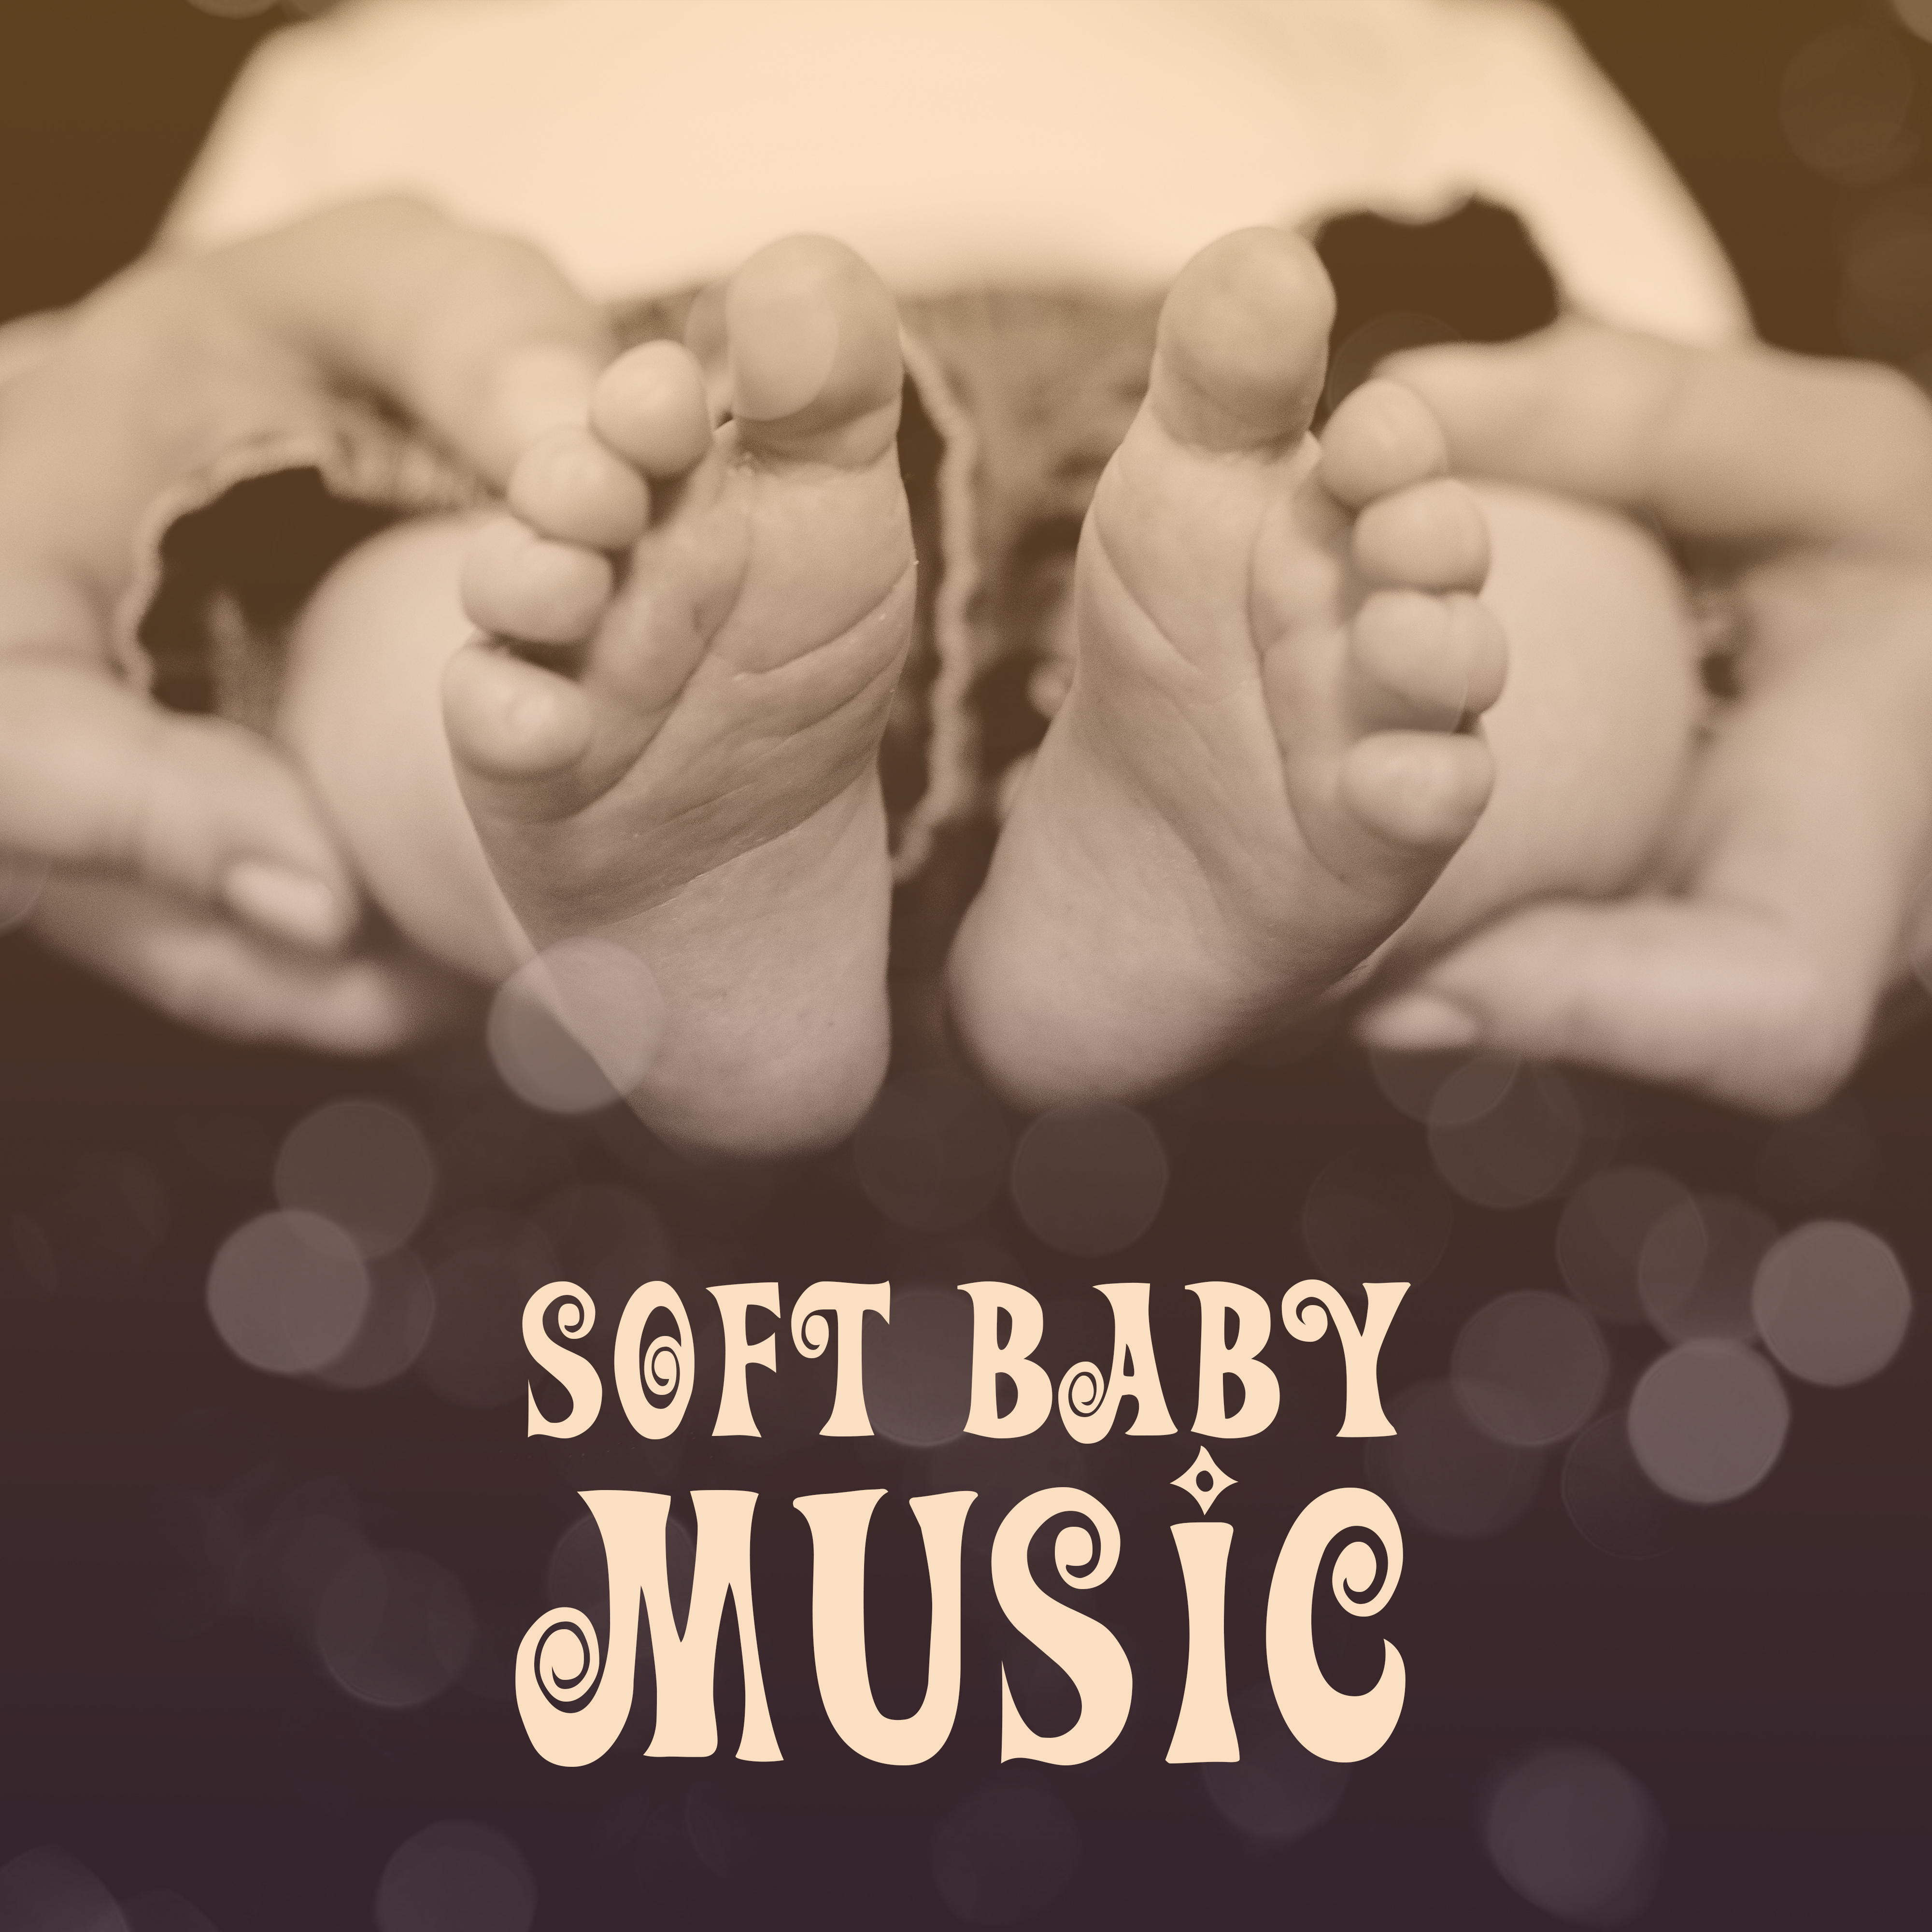 Soft Baby Music  New Age Music for Baby Massage, Falling Asleep, Relax, Music for Baby